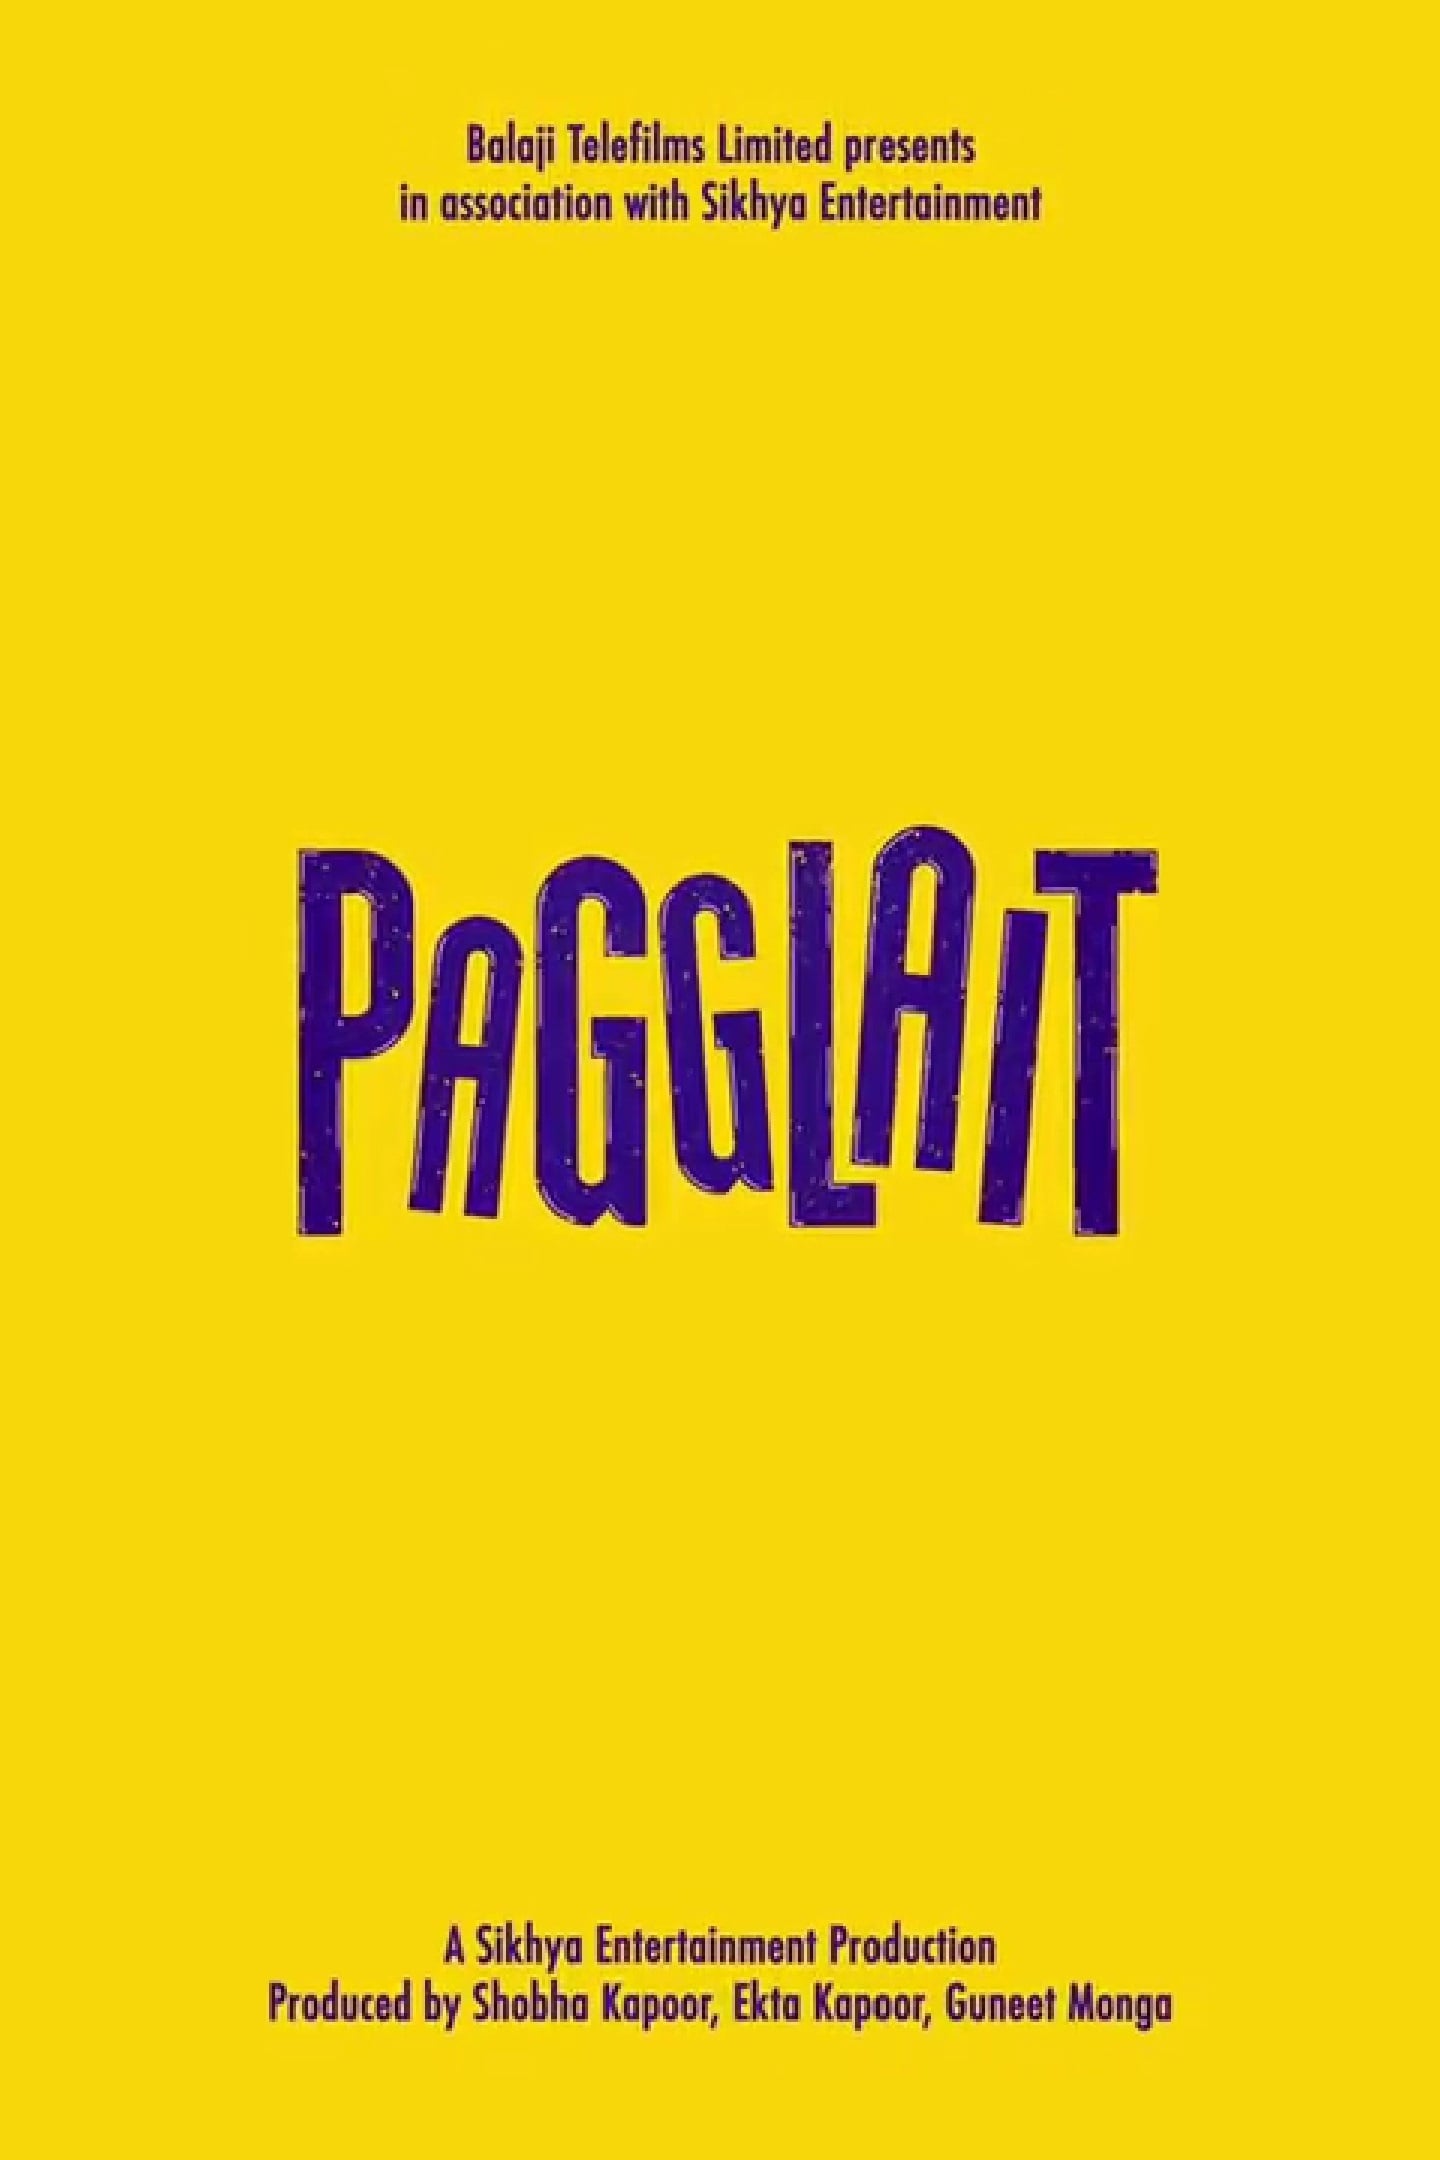 Poster for the movie "Pagglait"